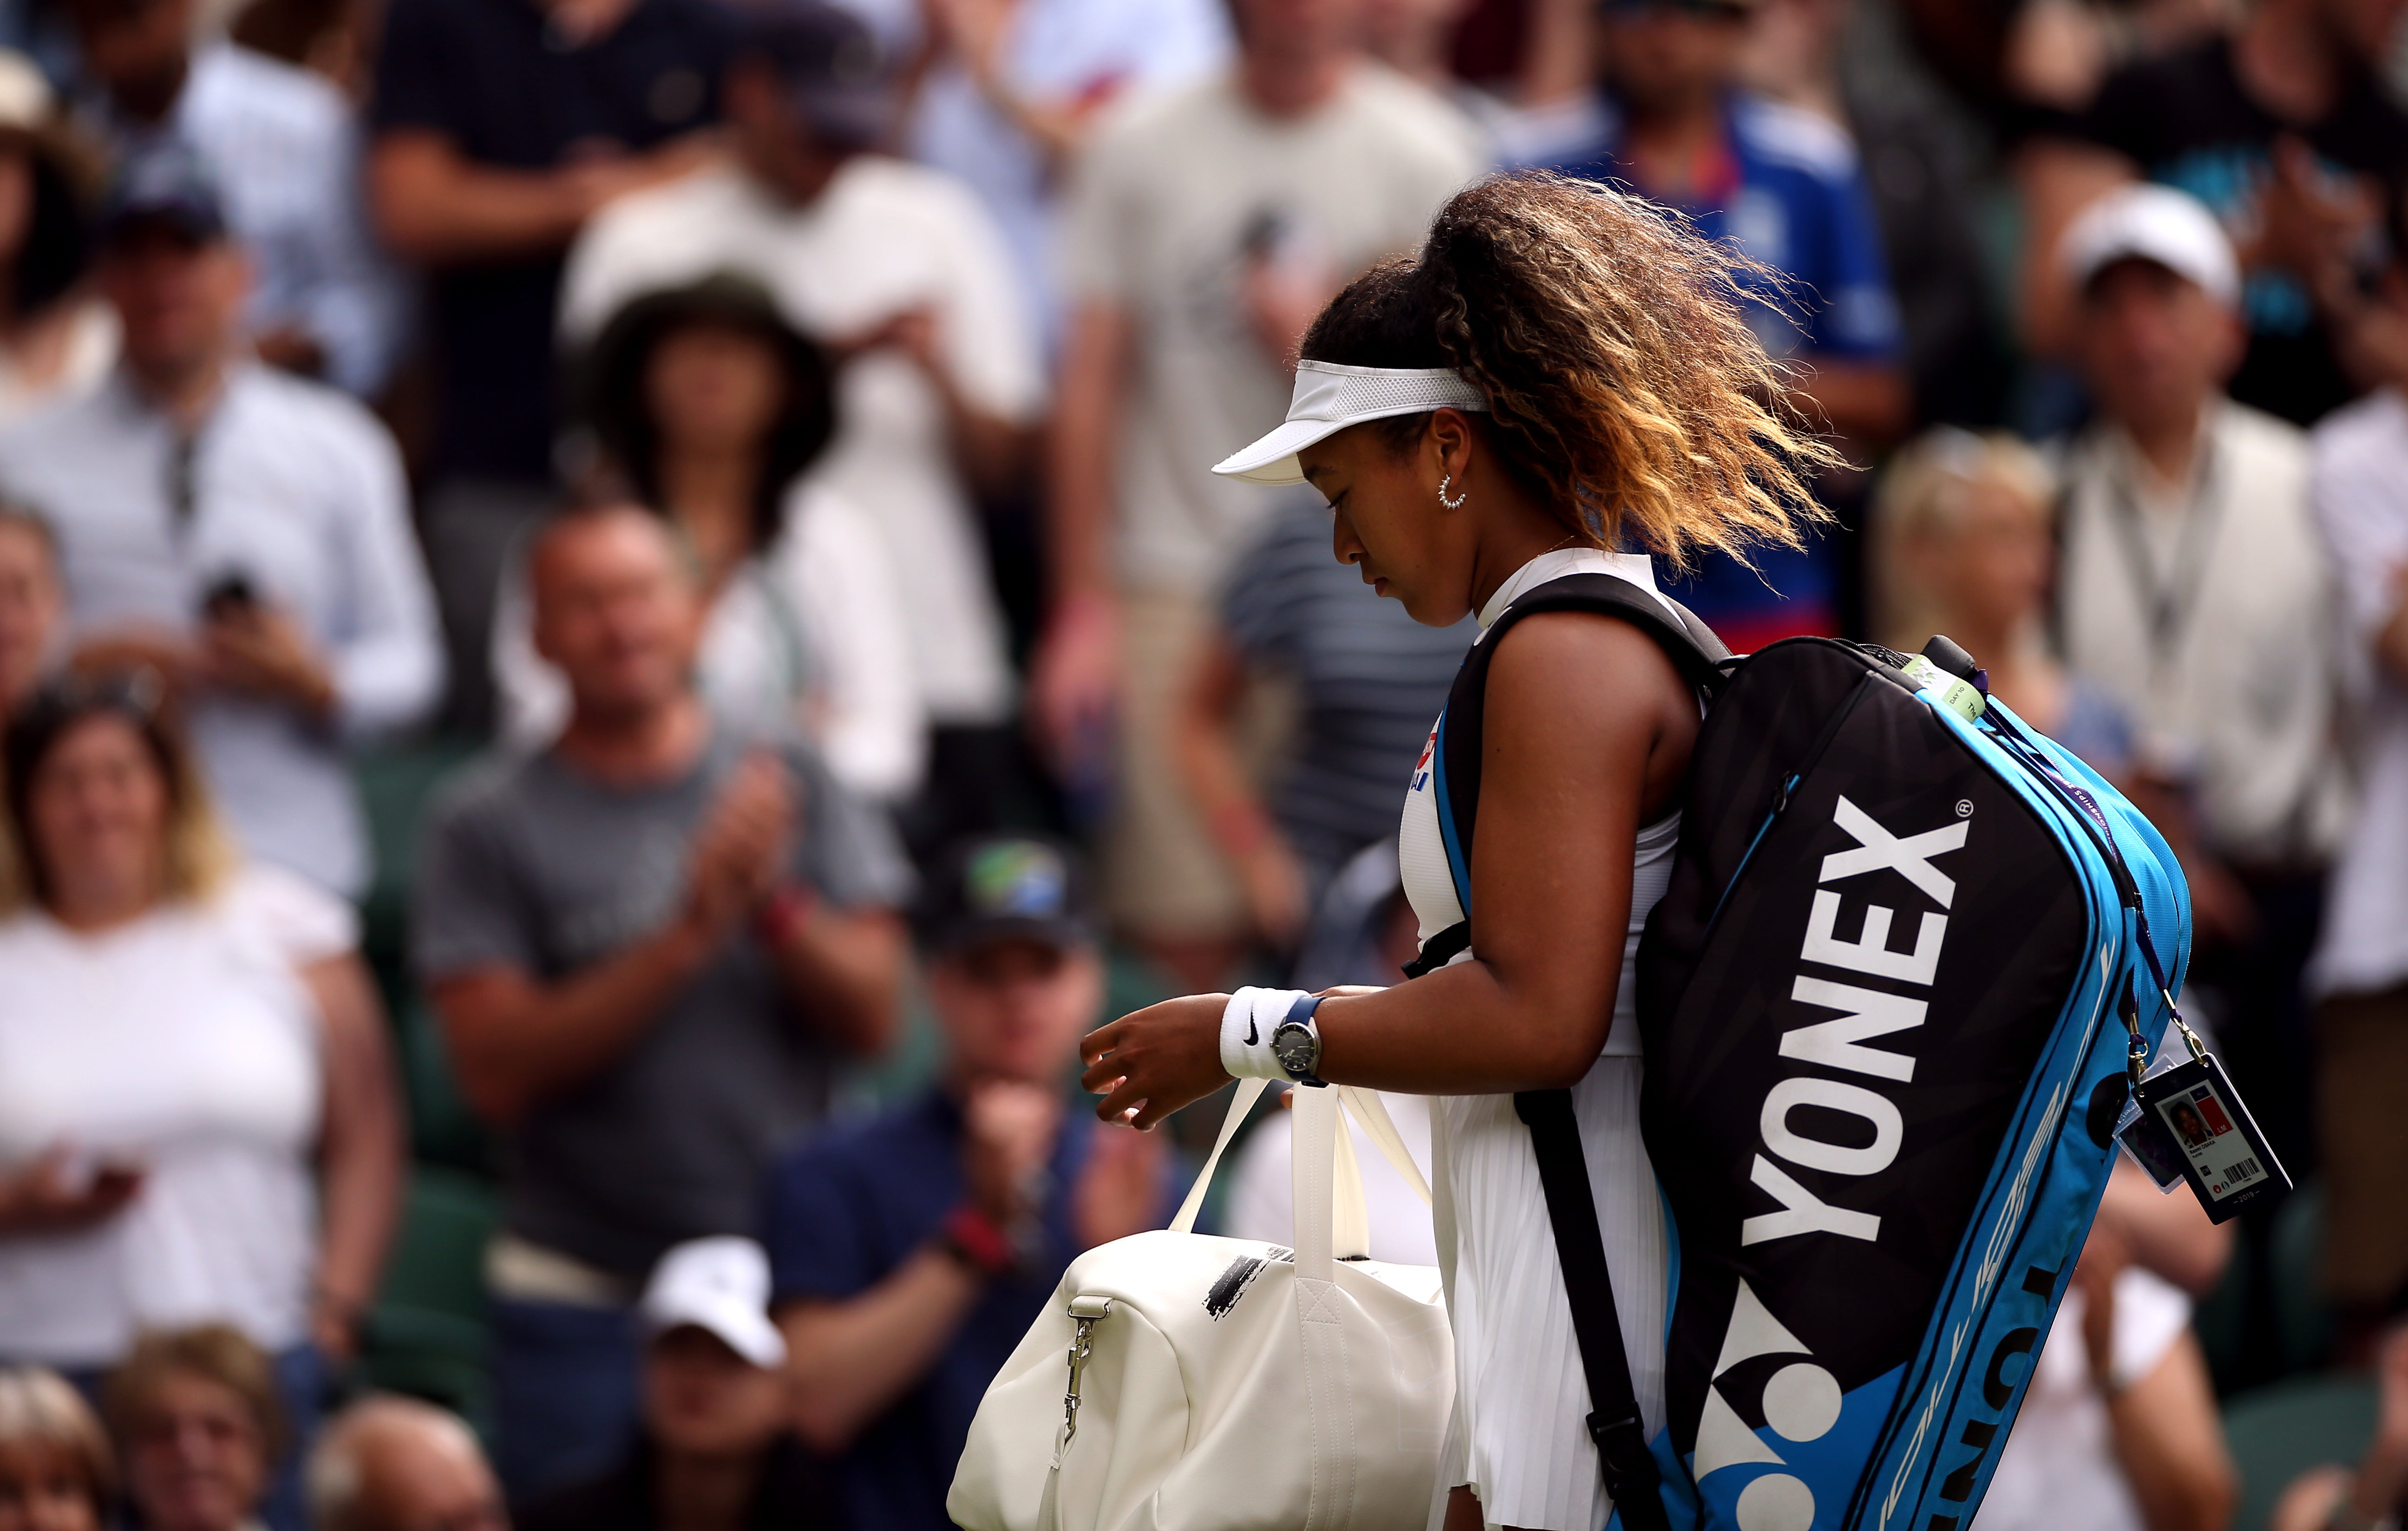 Naomi Osaka has pulled out of the French Open